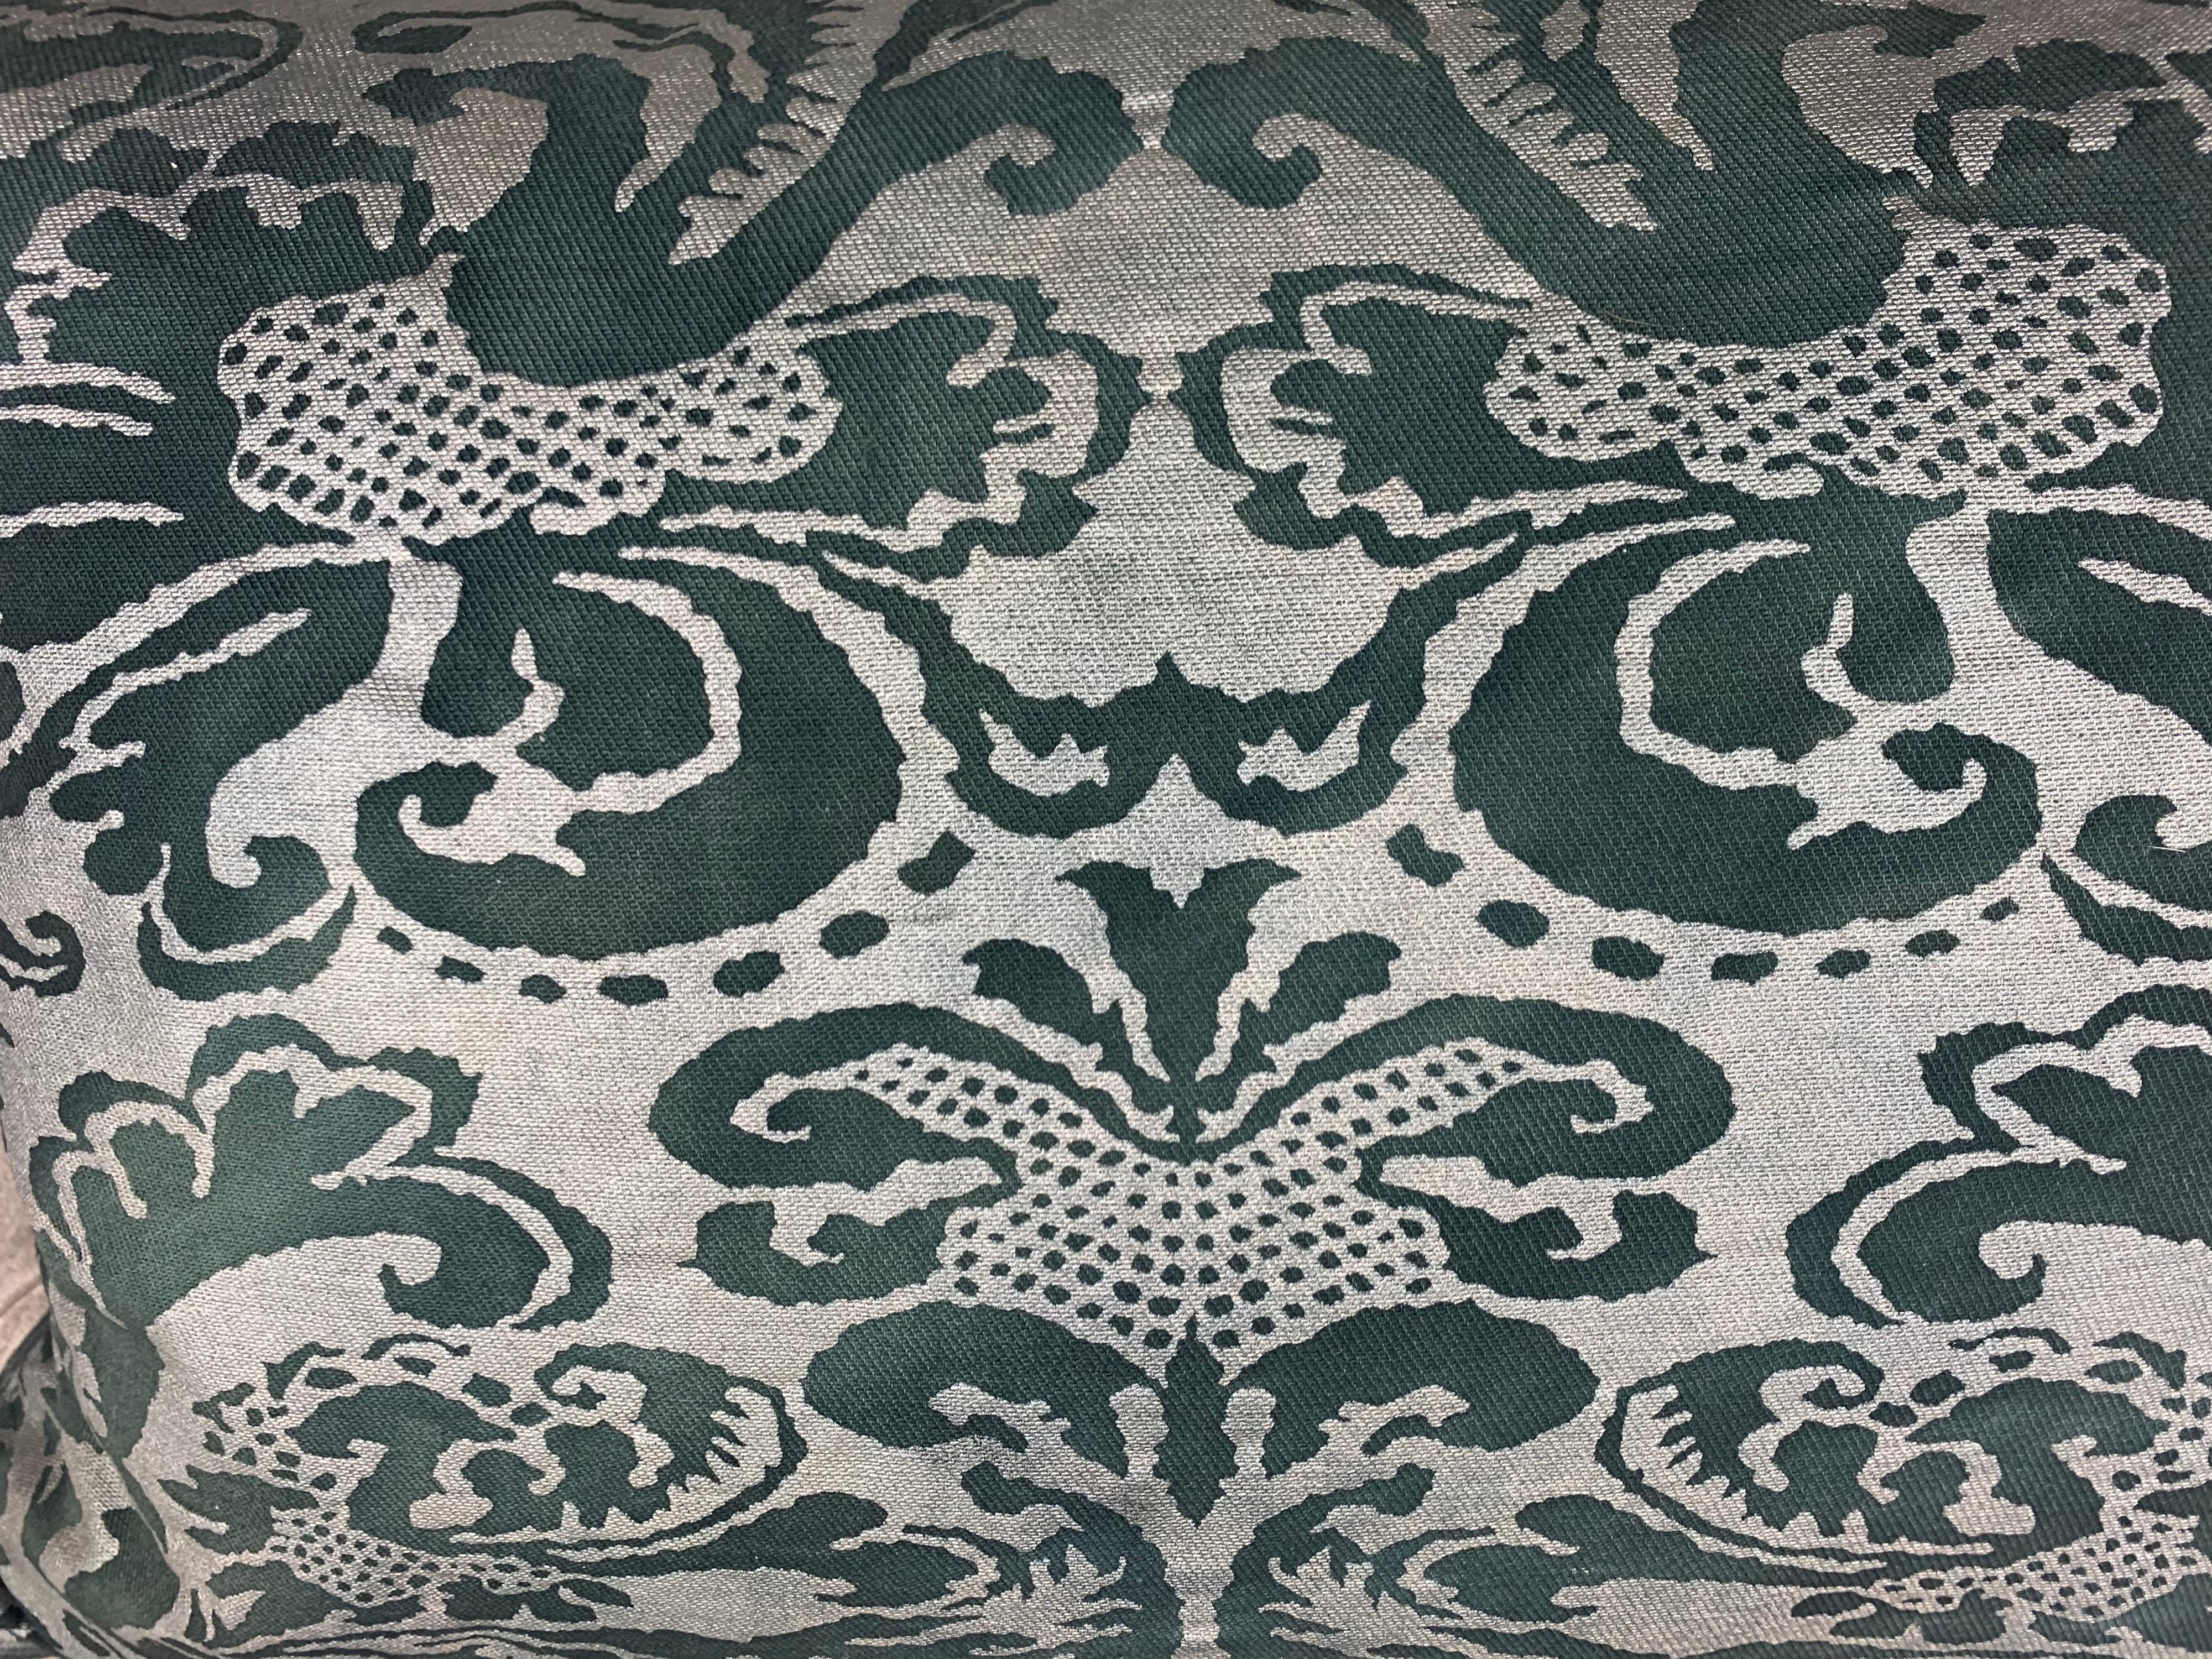 Pair of custom Italian printed cotton Fortuny pillows with gray velvet backs. This unique color is a dark greenish-almost black with a silvery gray background. Self cord detail, down inserts.